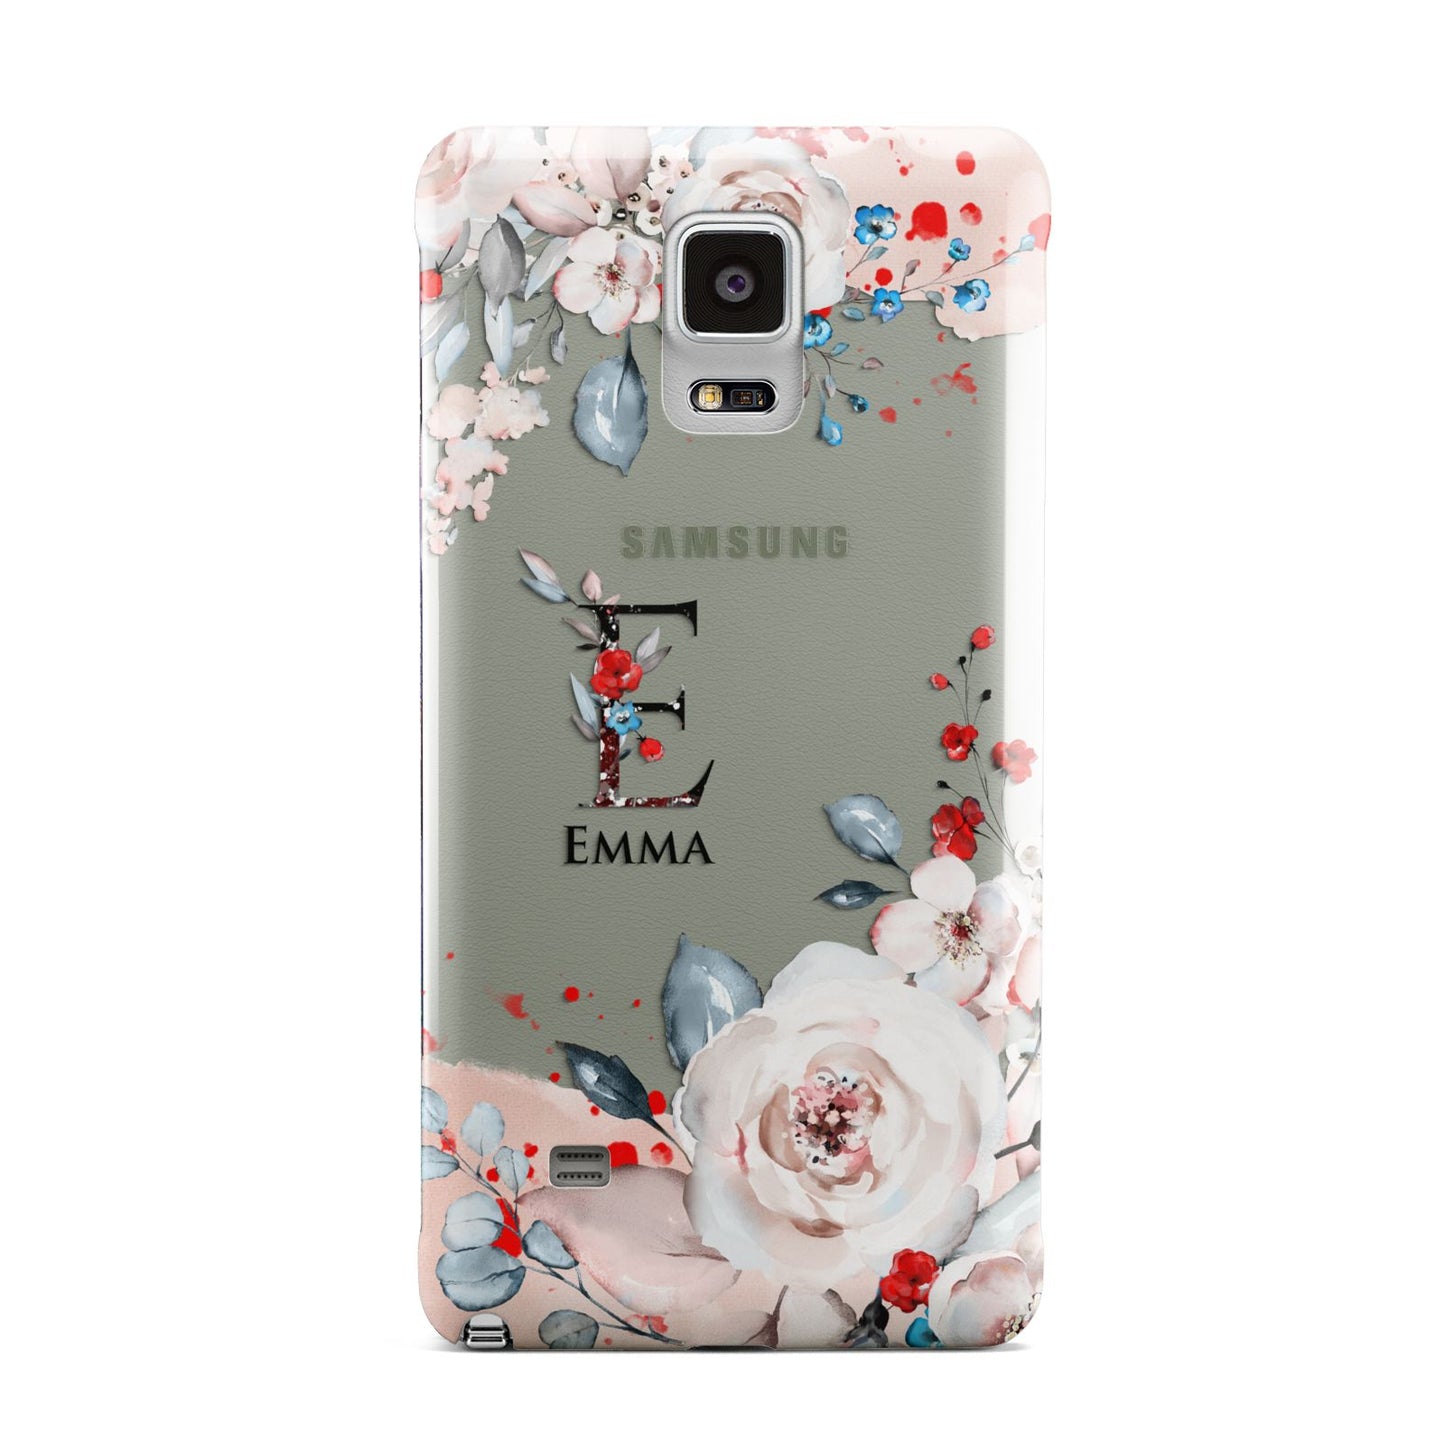 Monogrammed Roses Floral Wreath Samsung Galaxy Note 4 Case